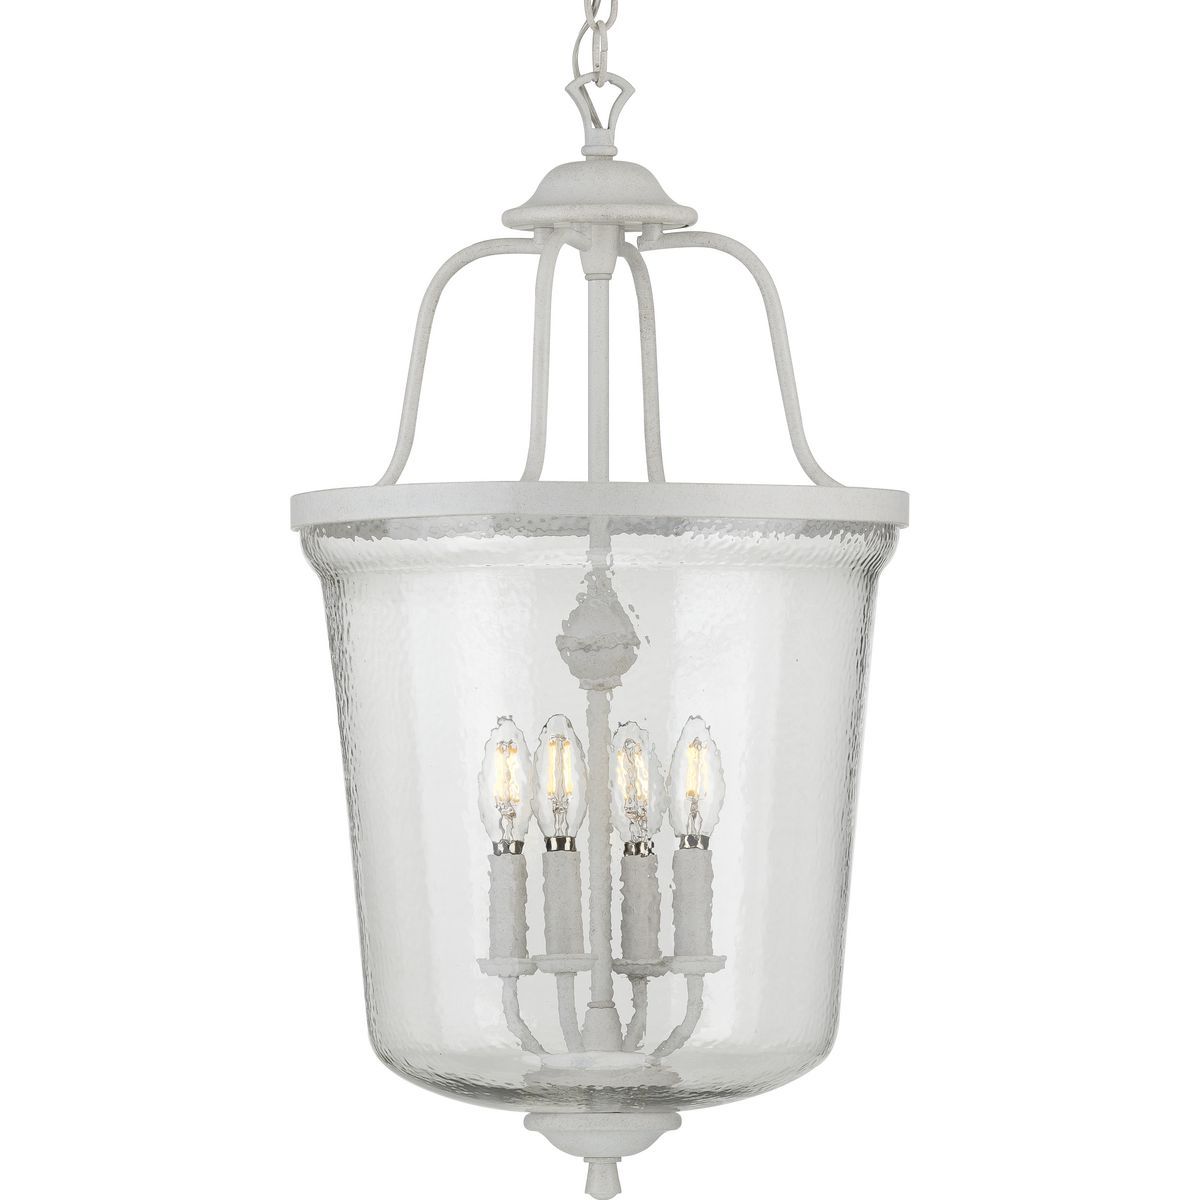 Bowman Collection Four Light Cottage White Foyer Pendant | P500207 151 |  Progress Lighting Within Cottage White Lantern Chandeliers (View 3 of 15)